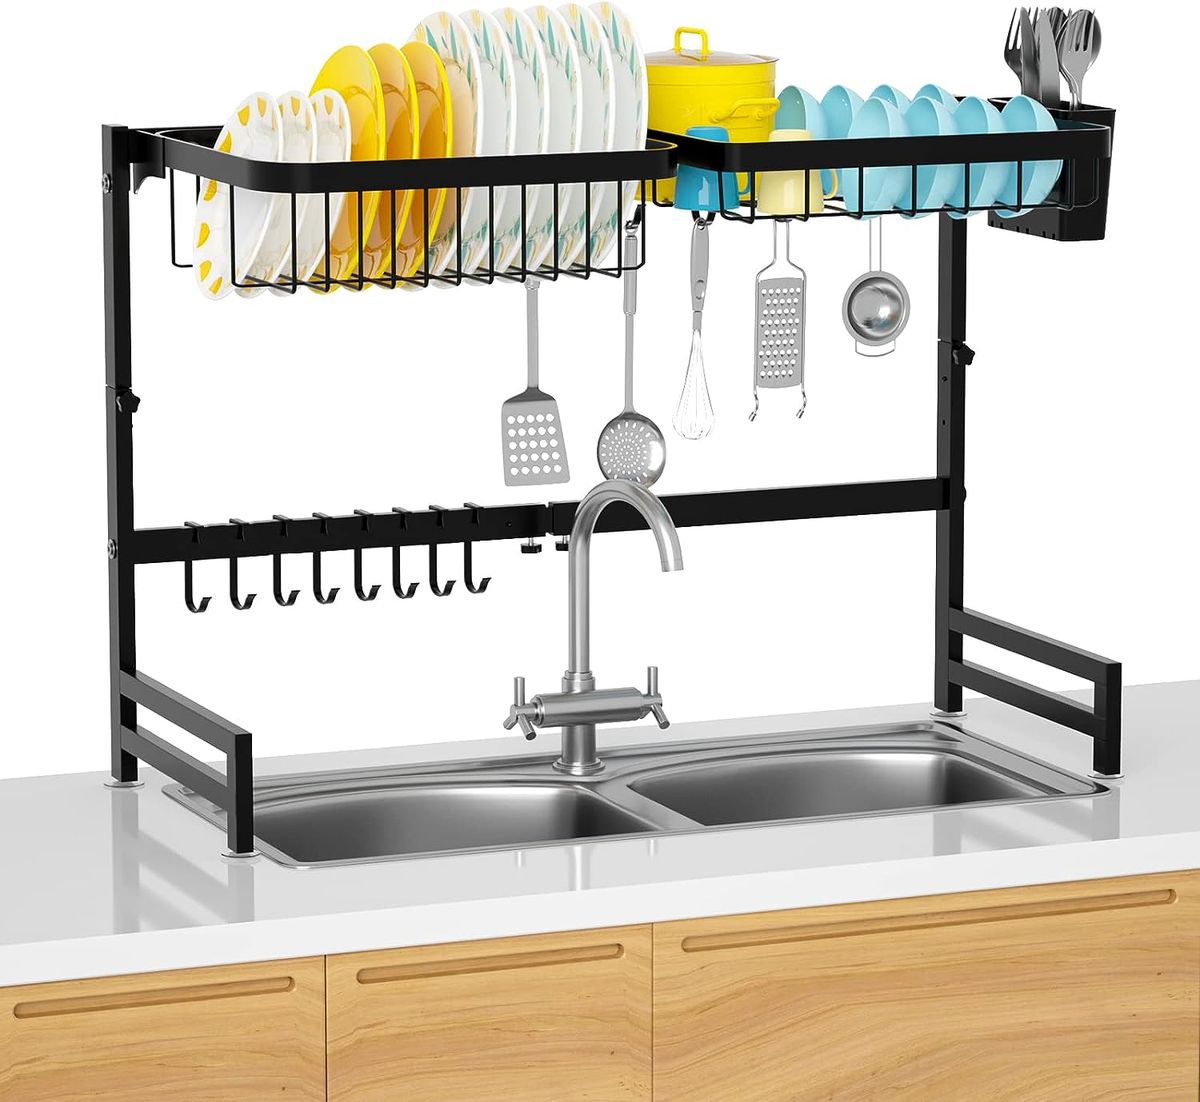 Over The Sink Dish Drying Rack,Adjustable,2 Tier Stainless Steel Dish Rack  Drainer, Large Stainless Steel Dish Rack Over Sink for Kitchen Counter  Organizer Storage Space Saver with Hooks (25.6-33.5) 